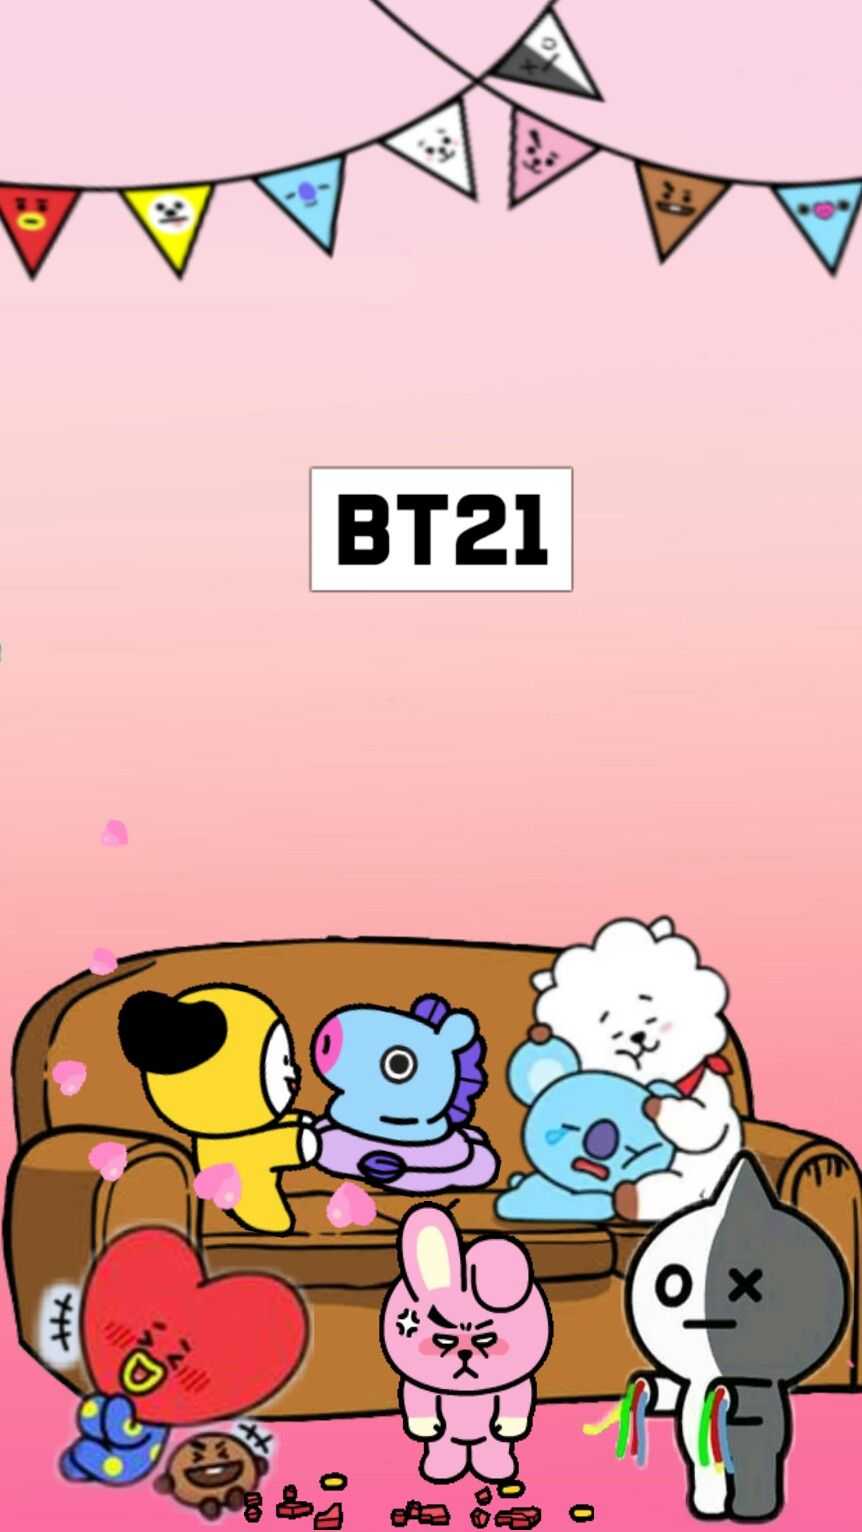 BT21 Wallpaper iPhone - KoLPaPer - Awesome Free HD Wallpapers